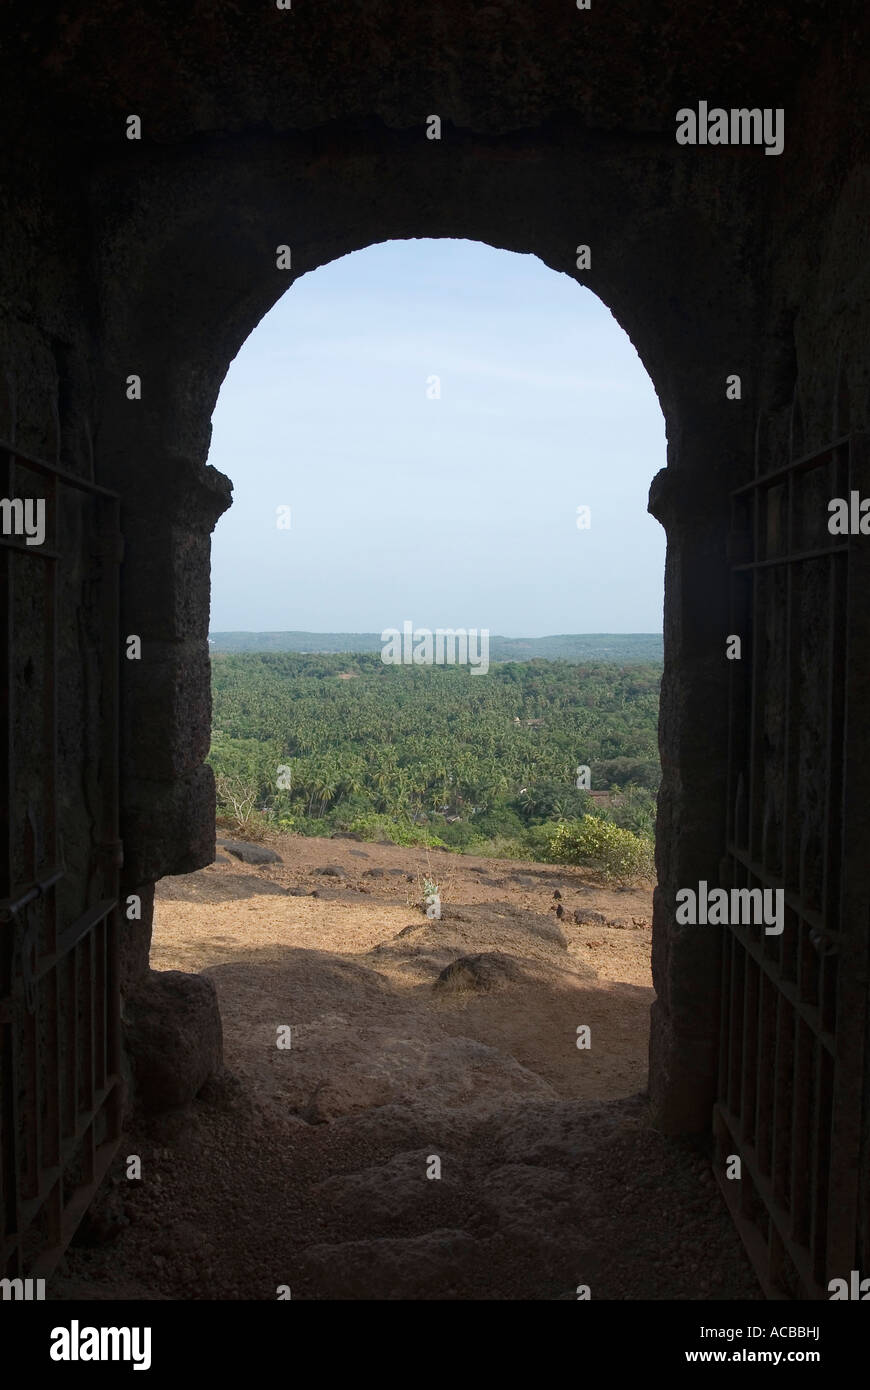 Archway of a fort, Chapora Fort, Goa, India Stock Photo